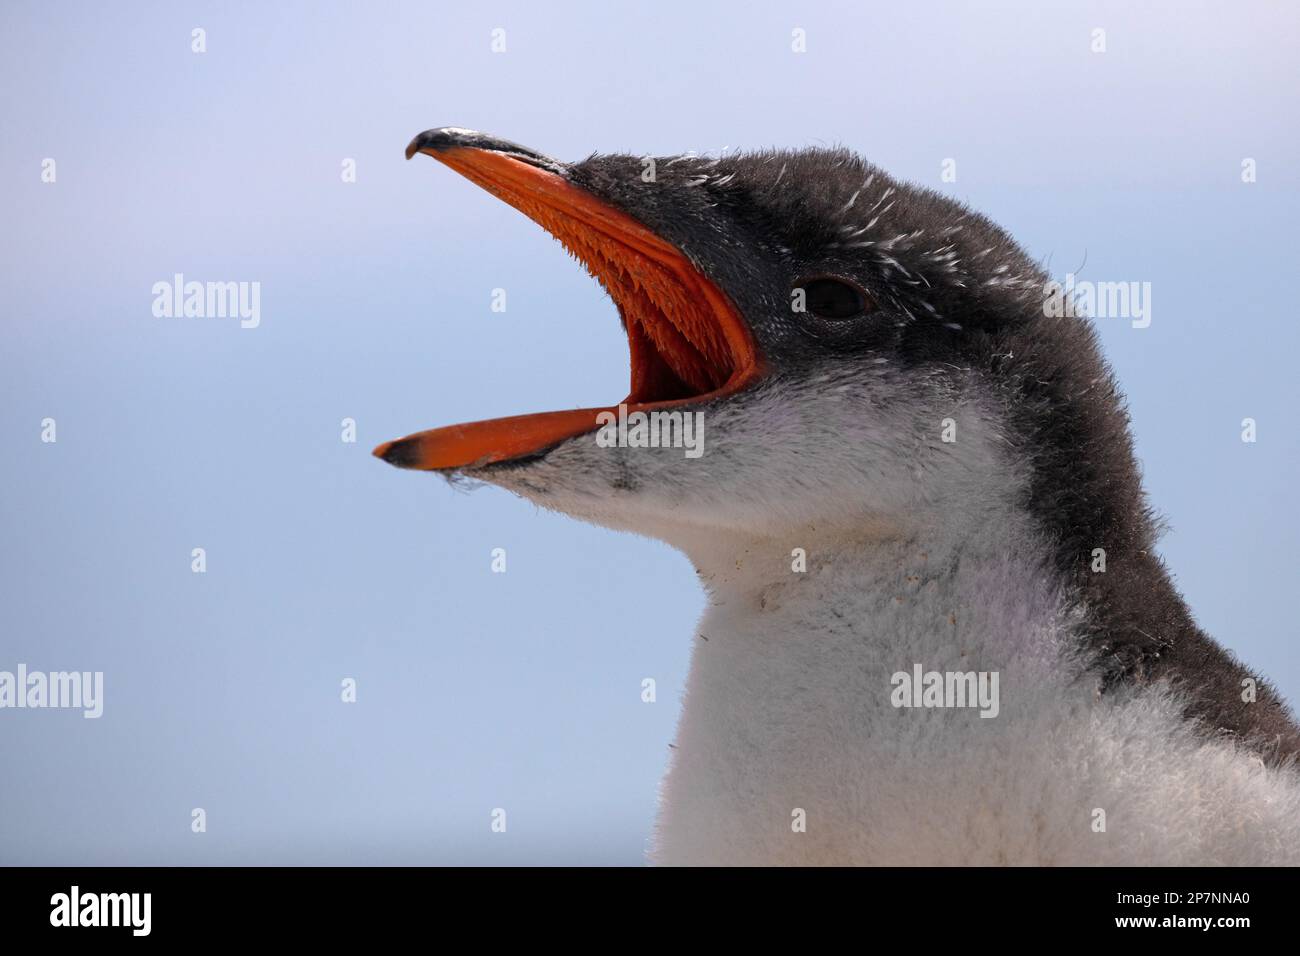 A Gentoo Penguin chick, Pygoscelis Papua,in a colony at Yorke Bay on The Falkland Islands. Stock Photo